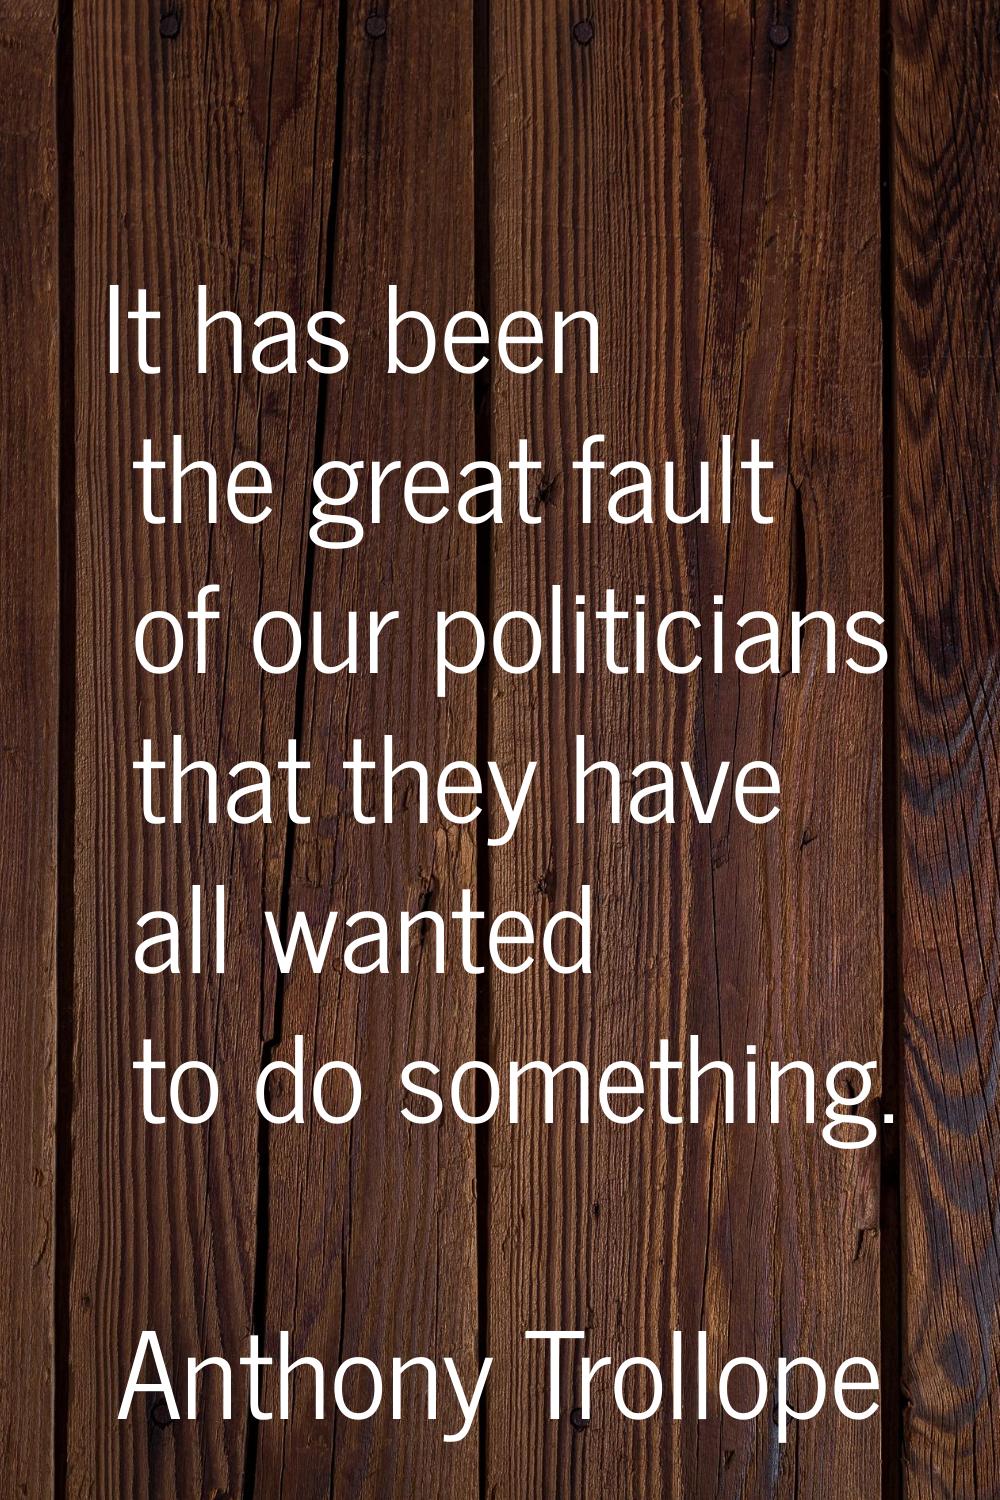 It has been the great fault of our politicians that they have all wanted to do something.